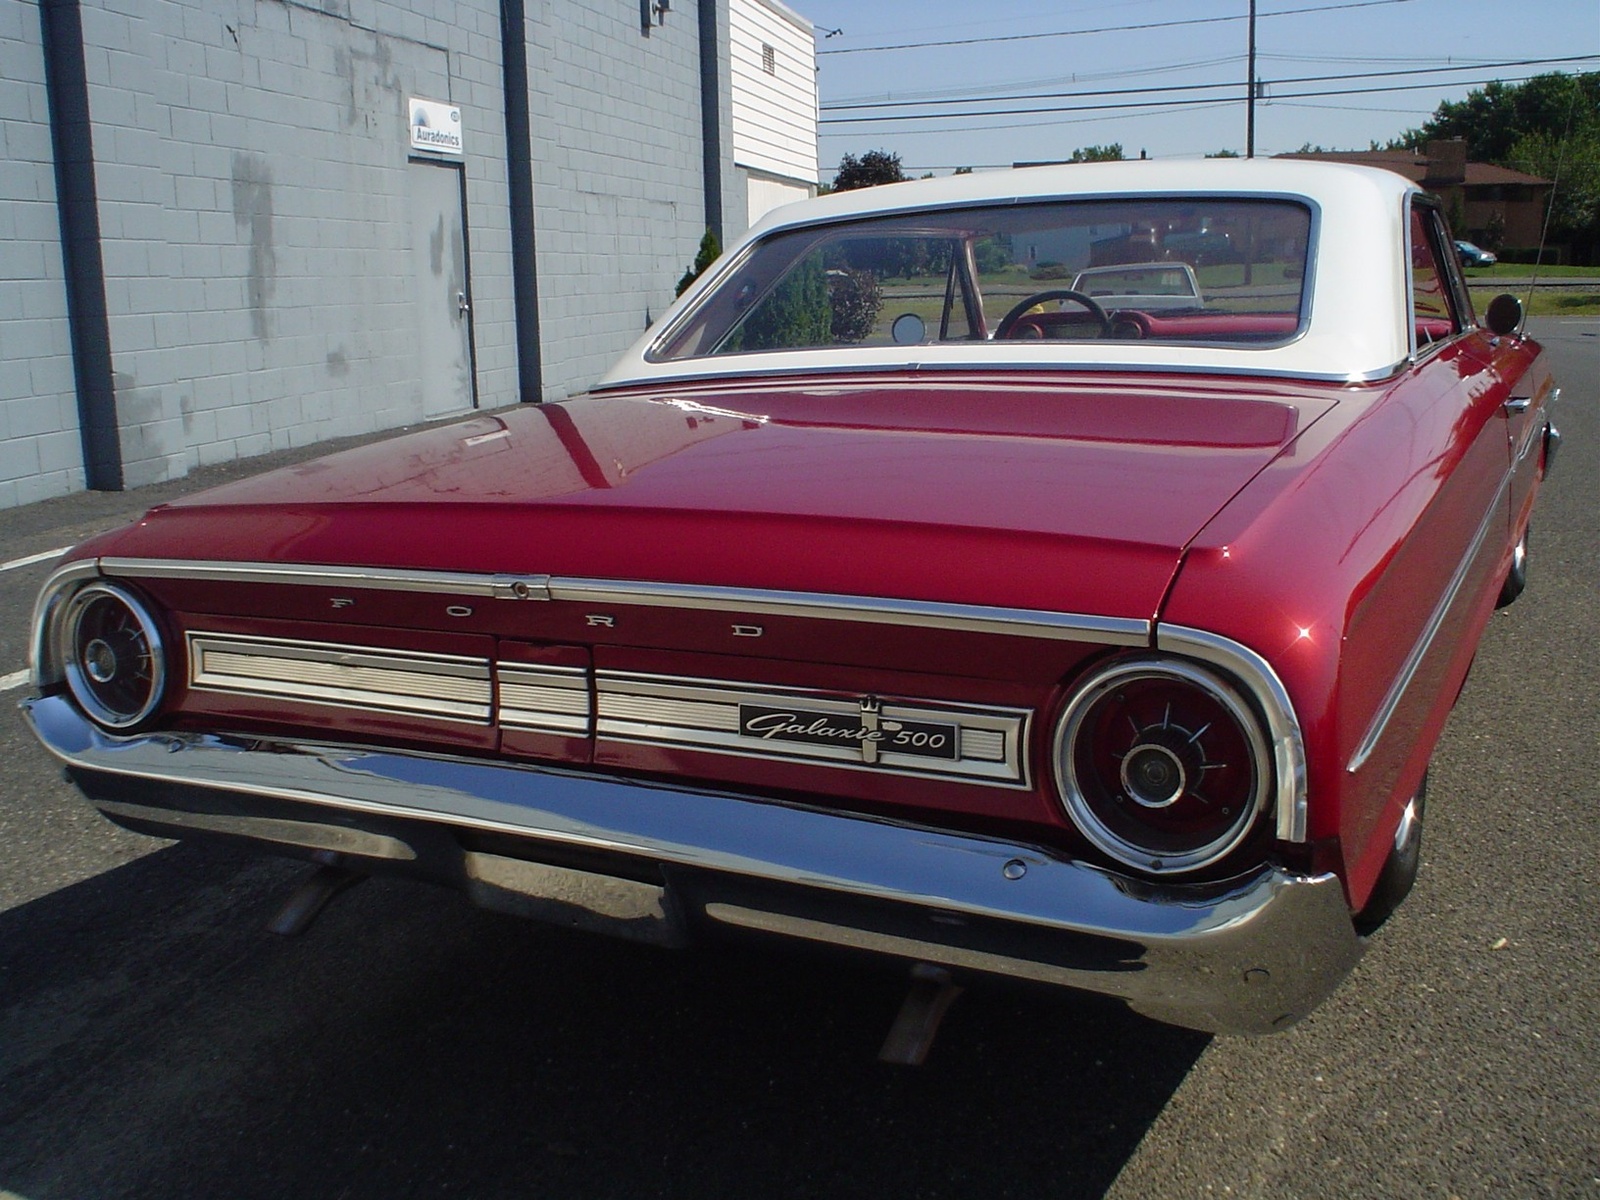 1964 Ford galixe #1